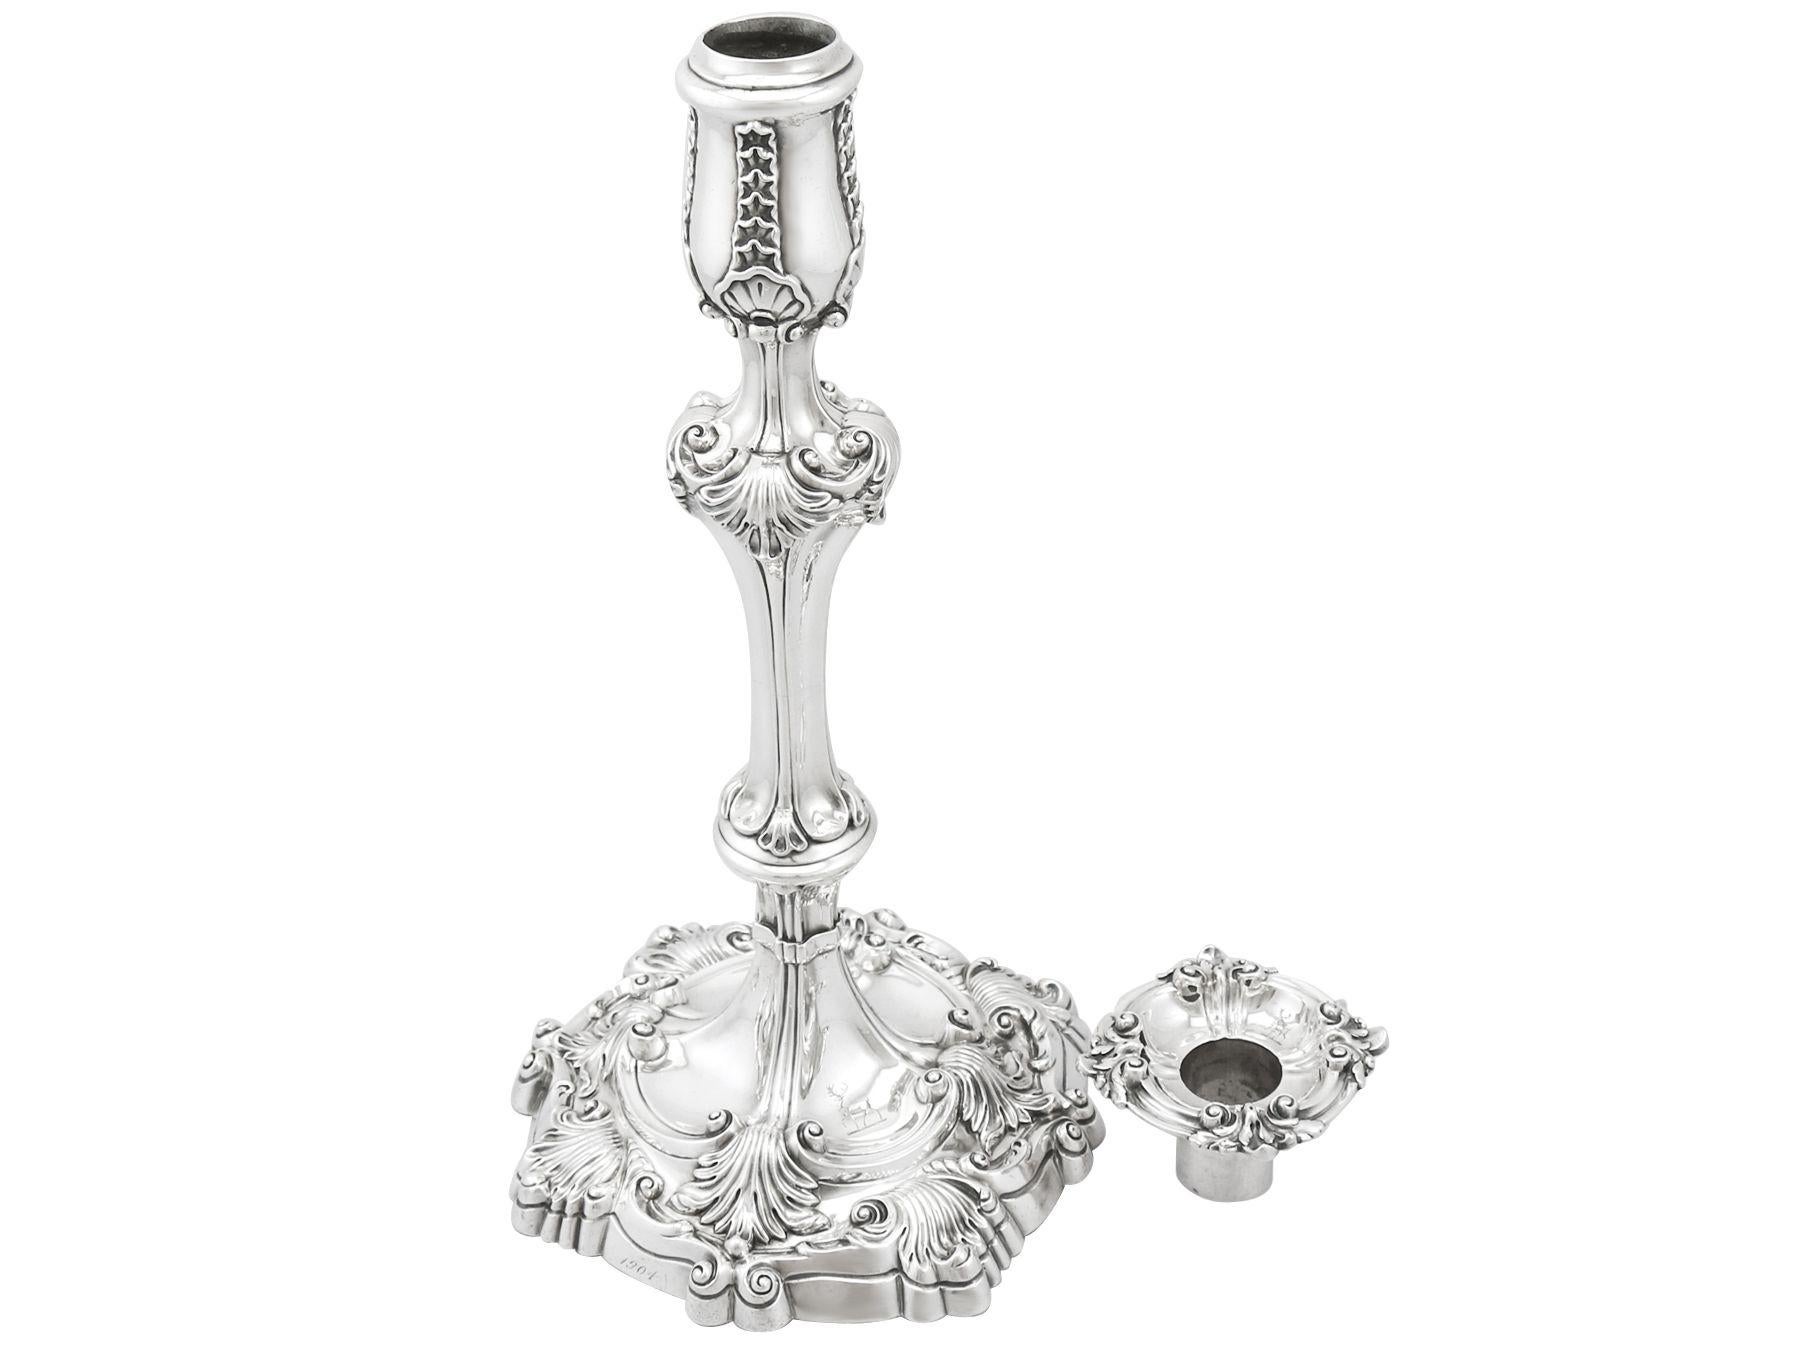 19th Century Antique Sterling Silver Candlesticks For Sale